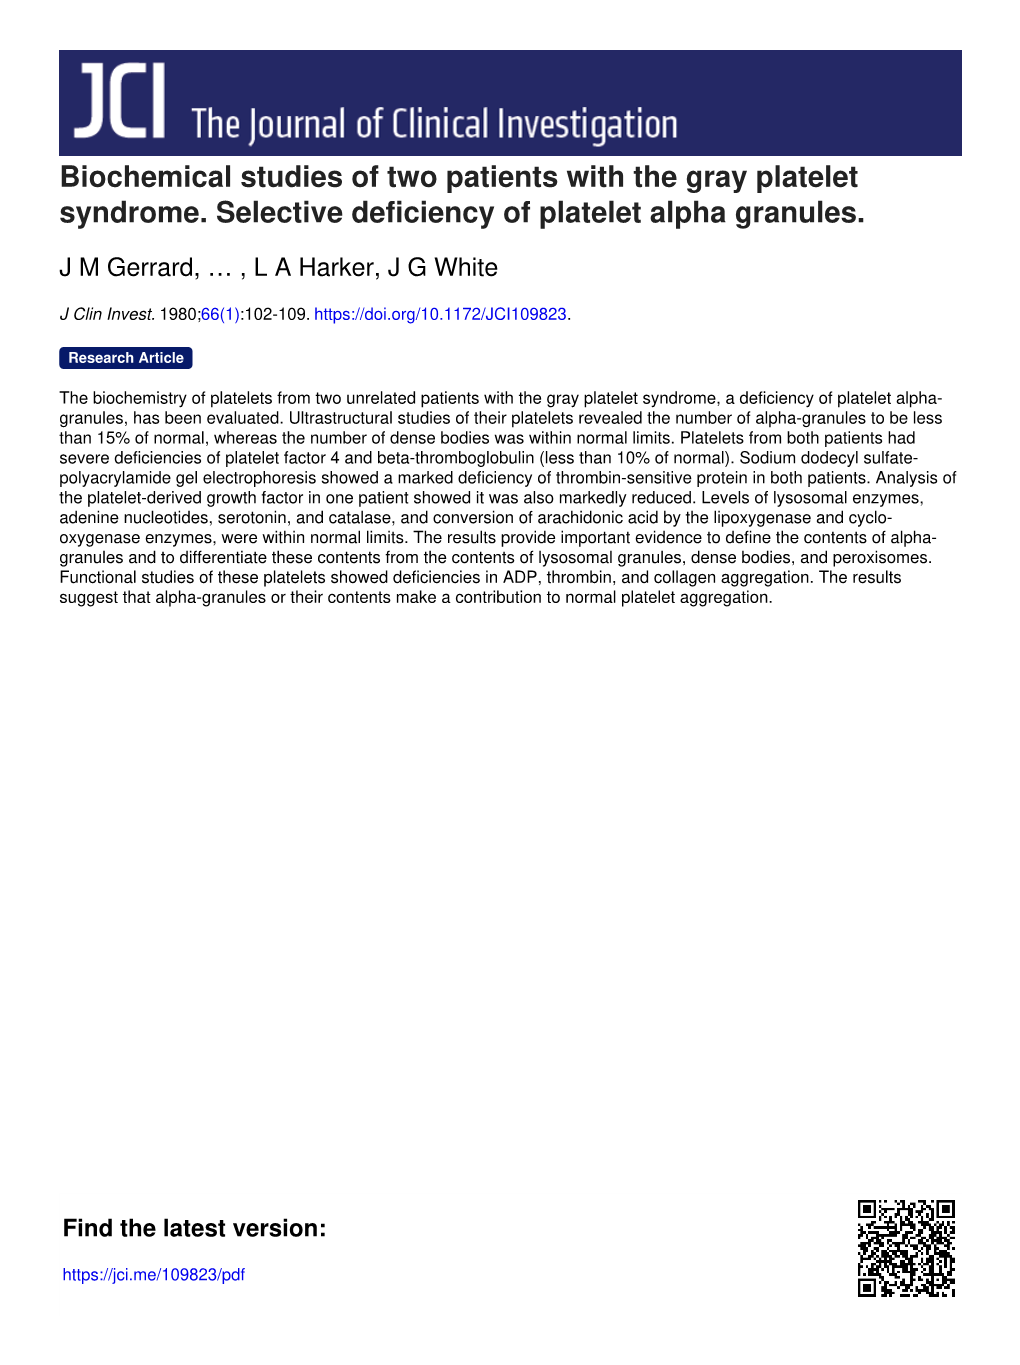 Biochemical Studies of Two Patients with the Gray Platelet Syndrome